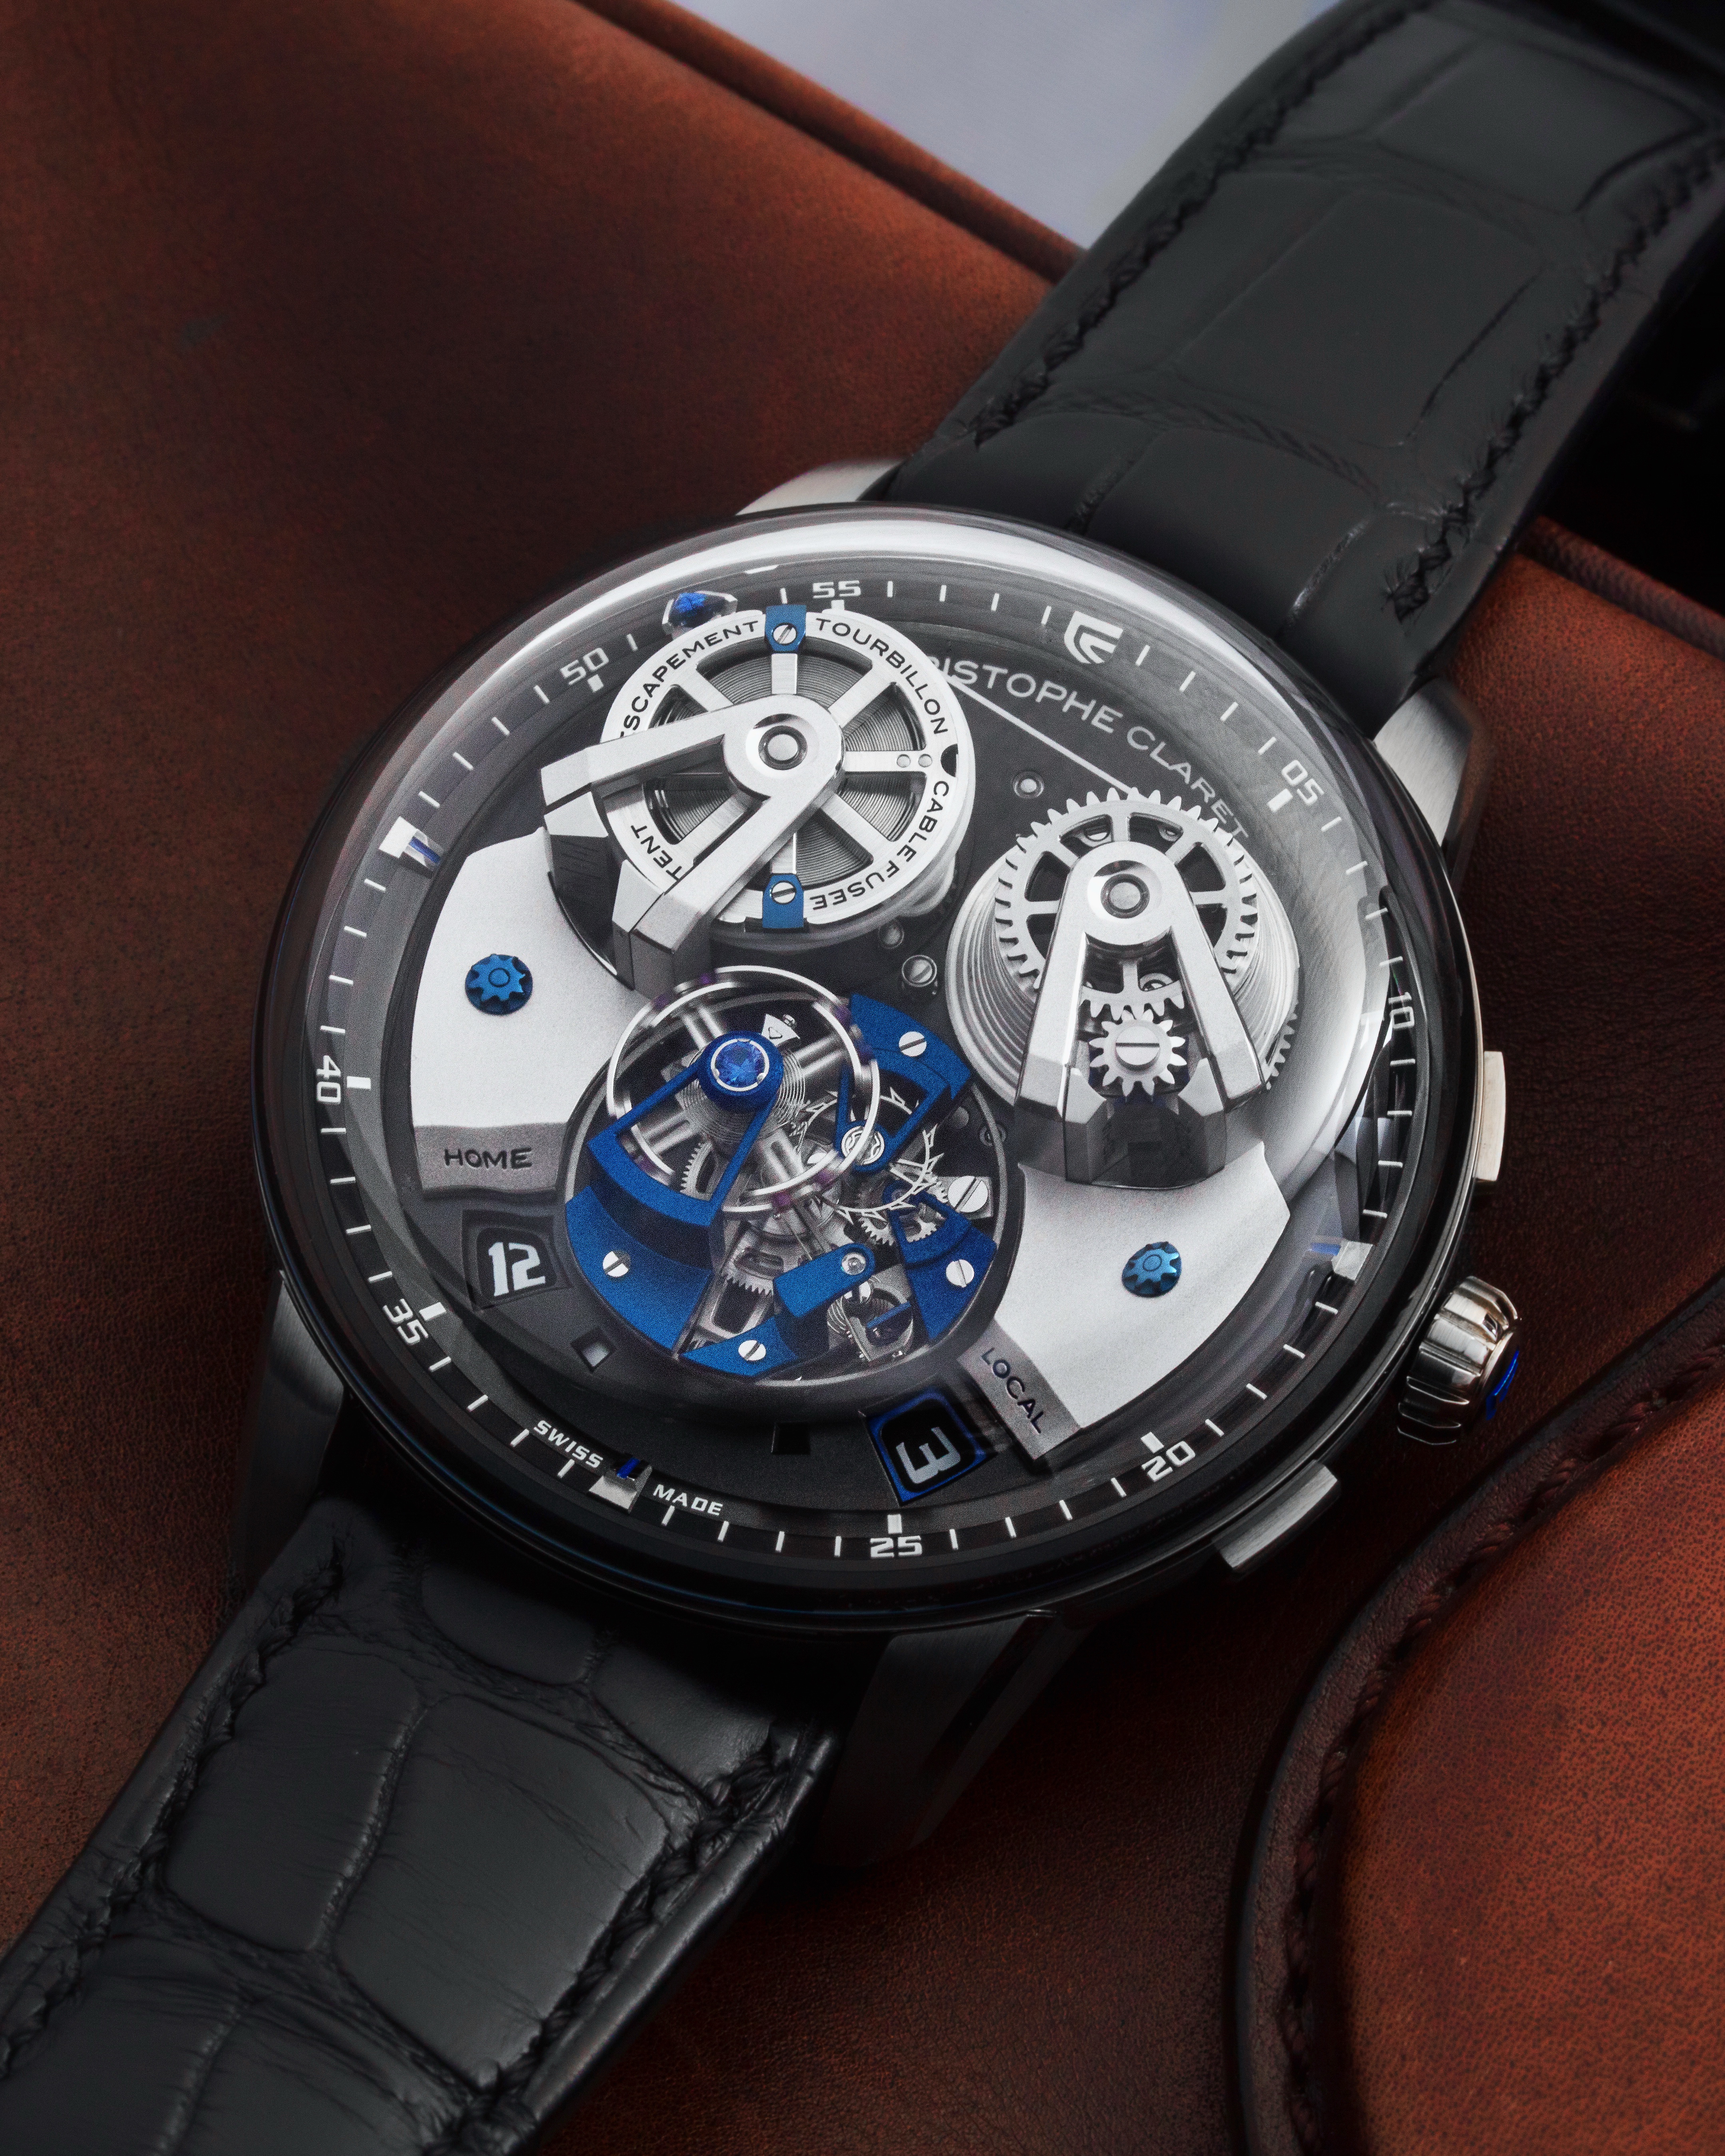 Christophe Claret Angelico watch